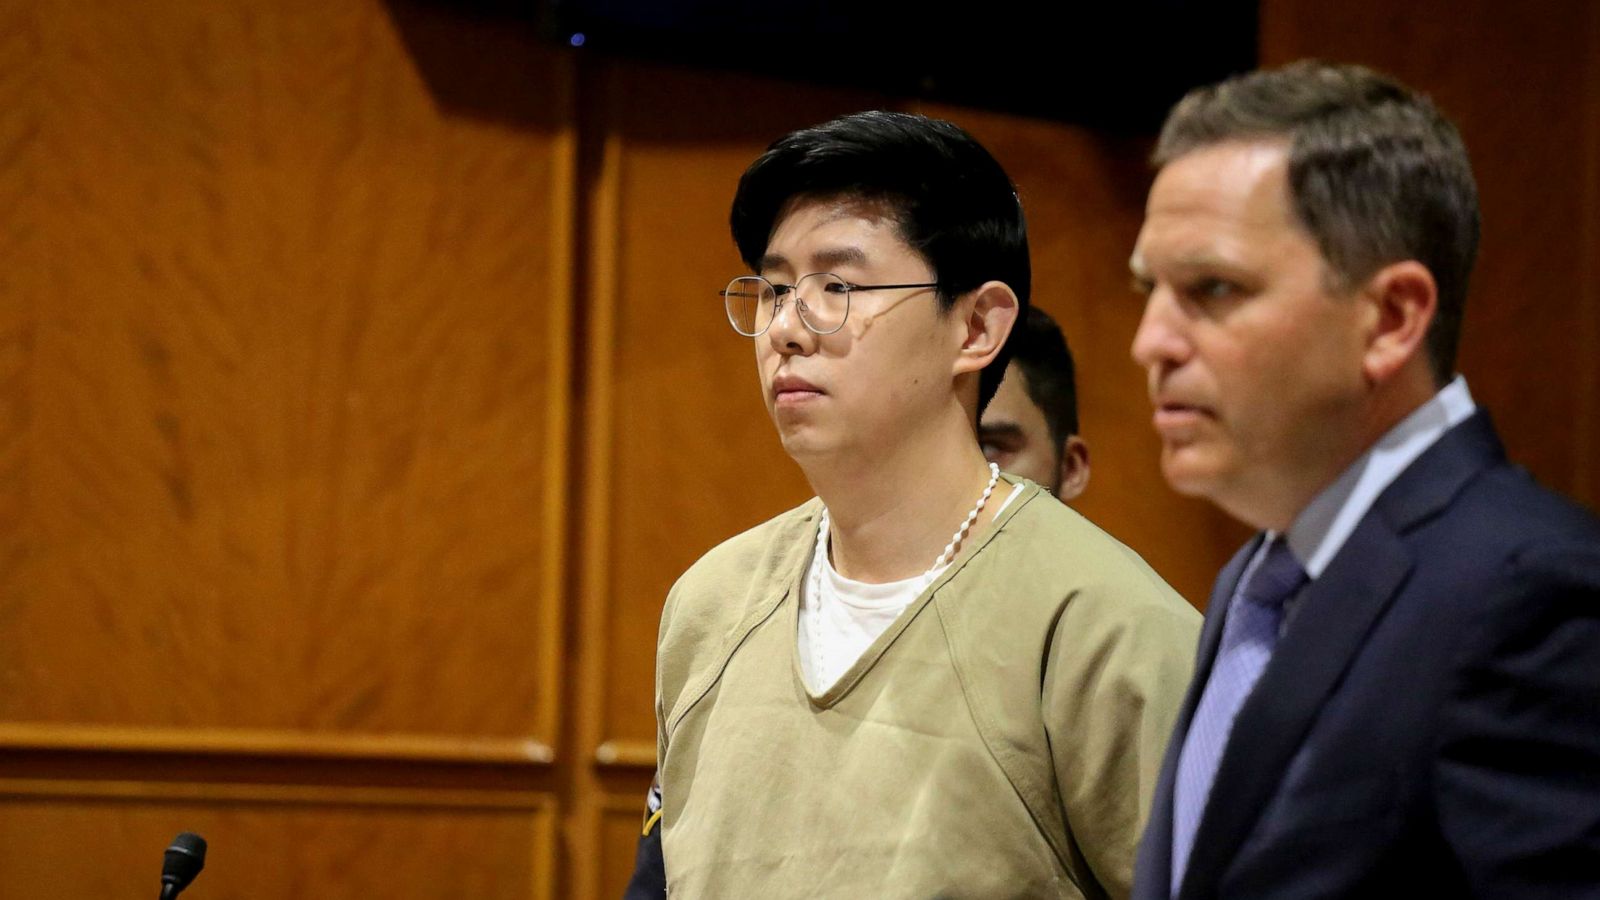 1600px x 900px - NYC doctor allegedly drugged, assaulted women, prosecutors say - ABC News